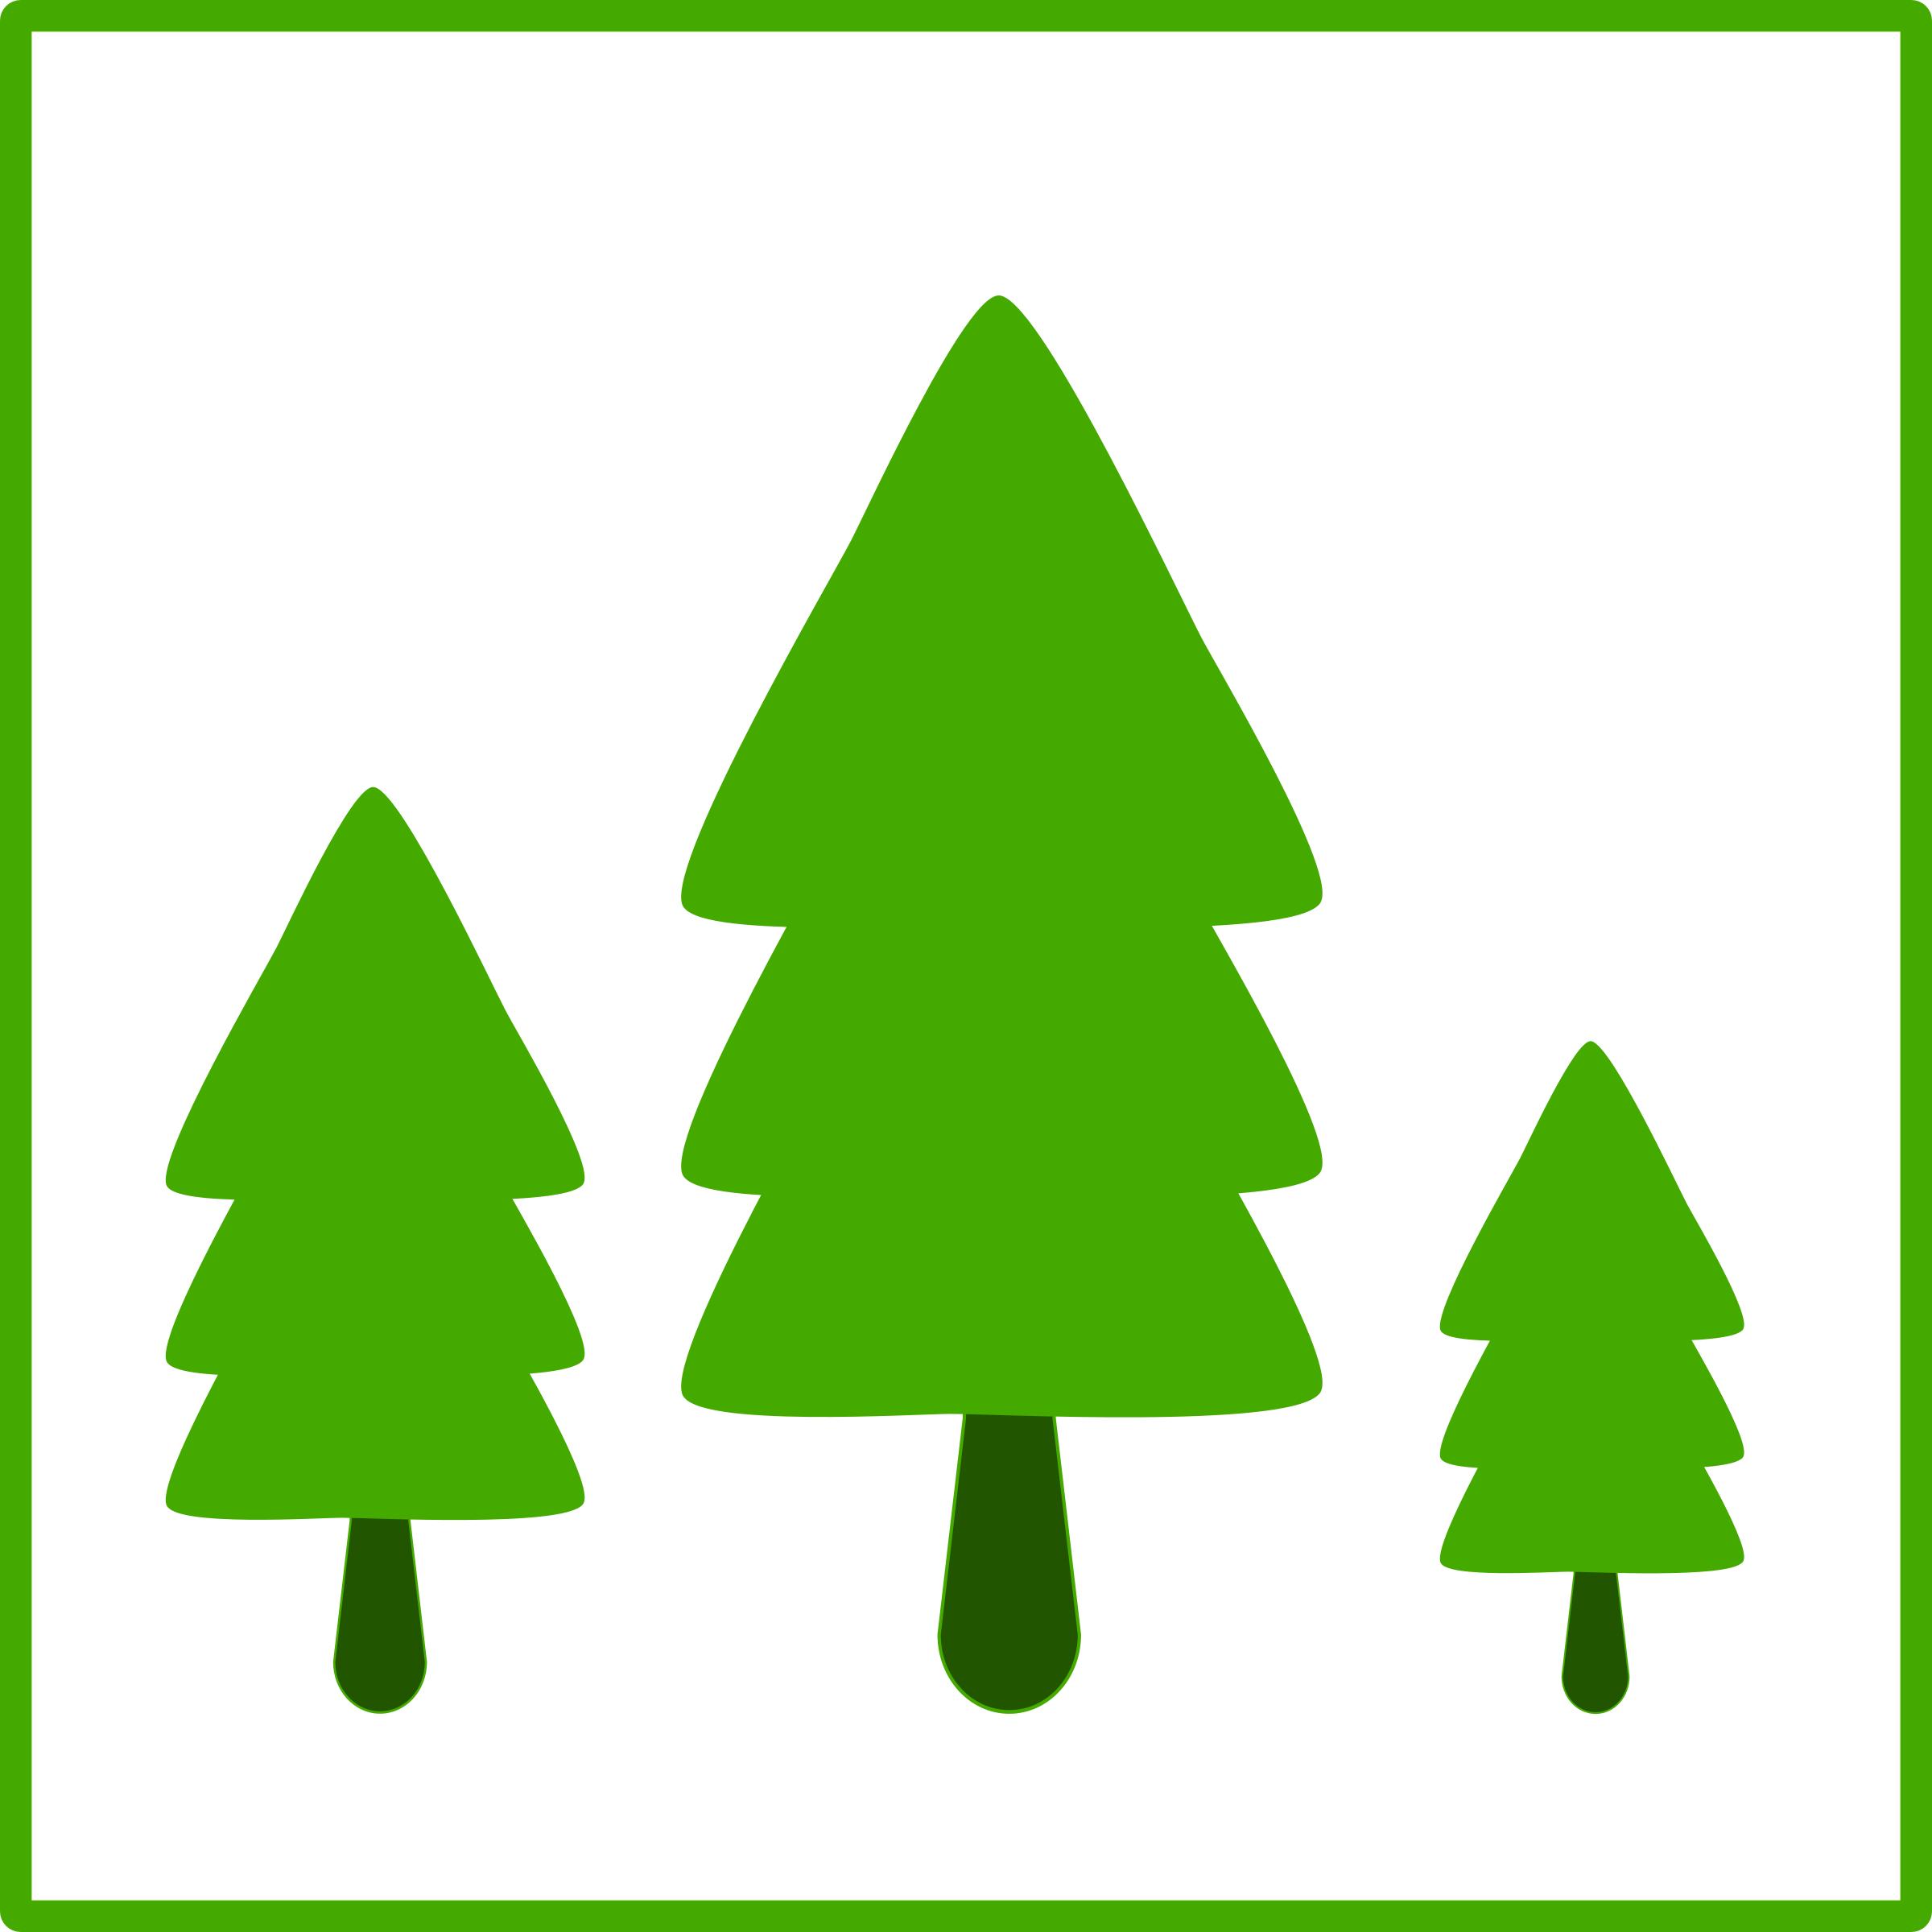 eco green trees icon
 png